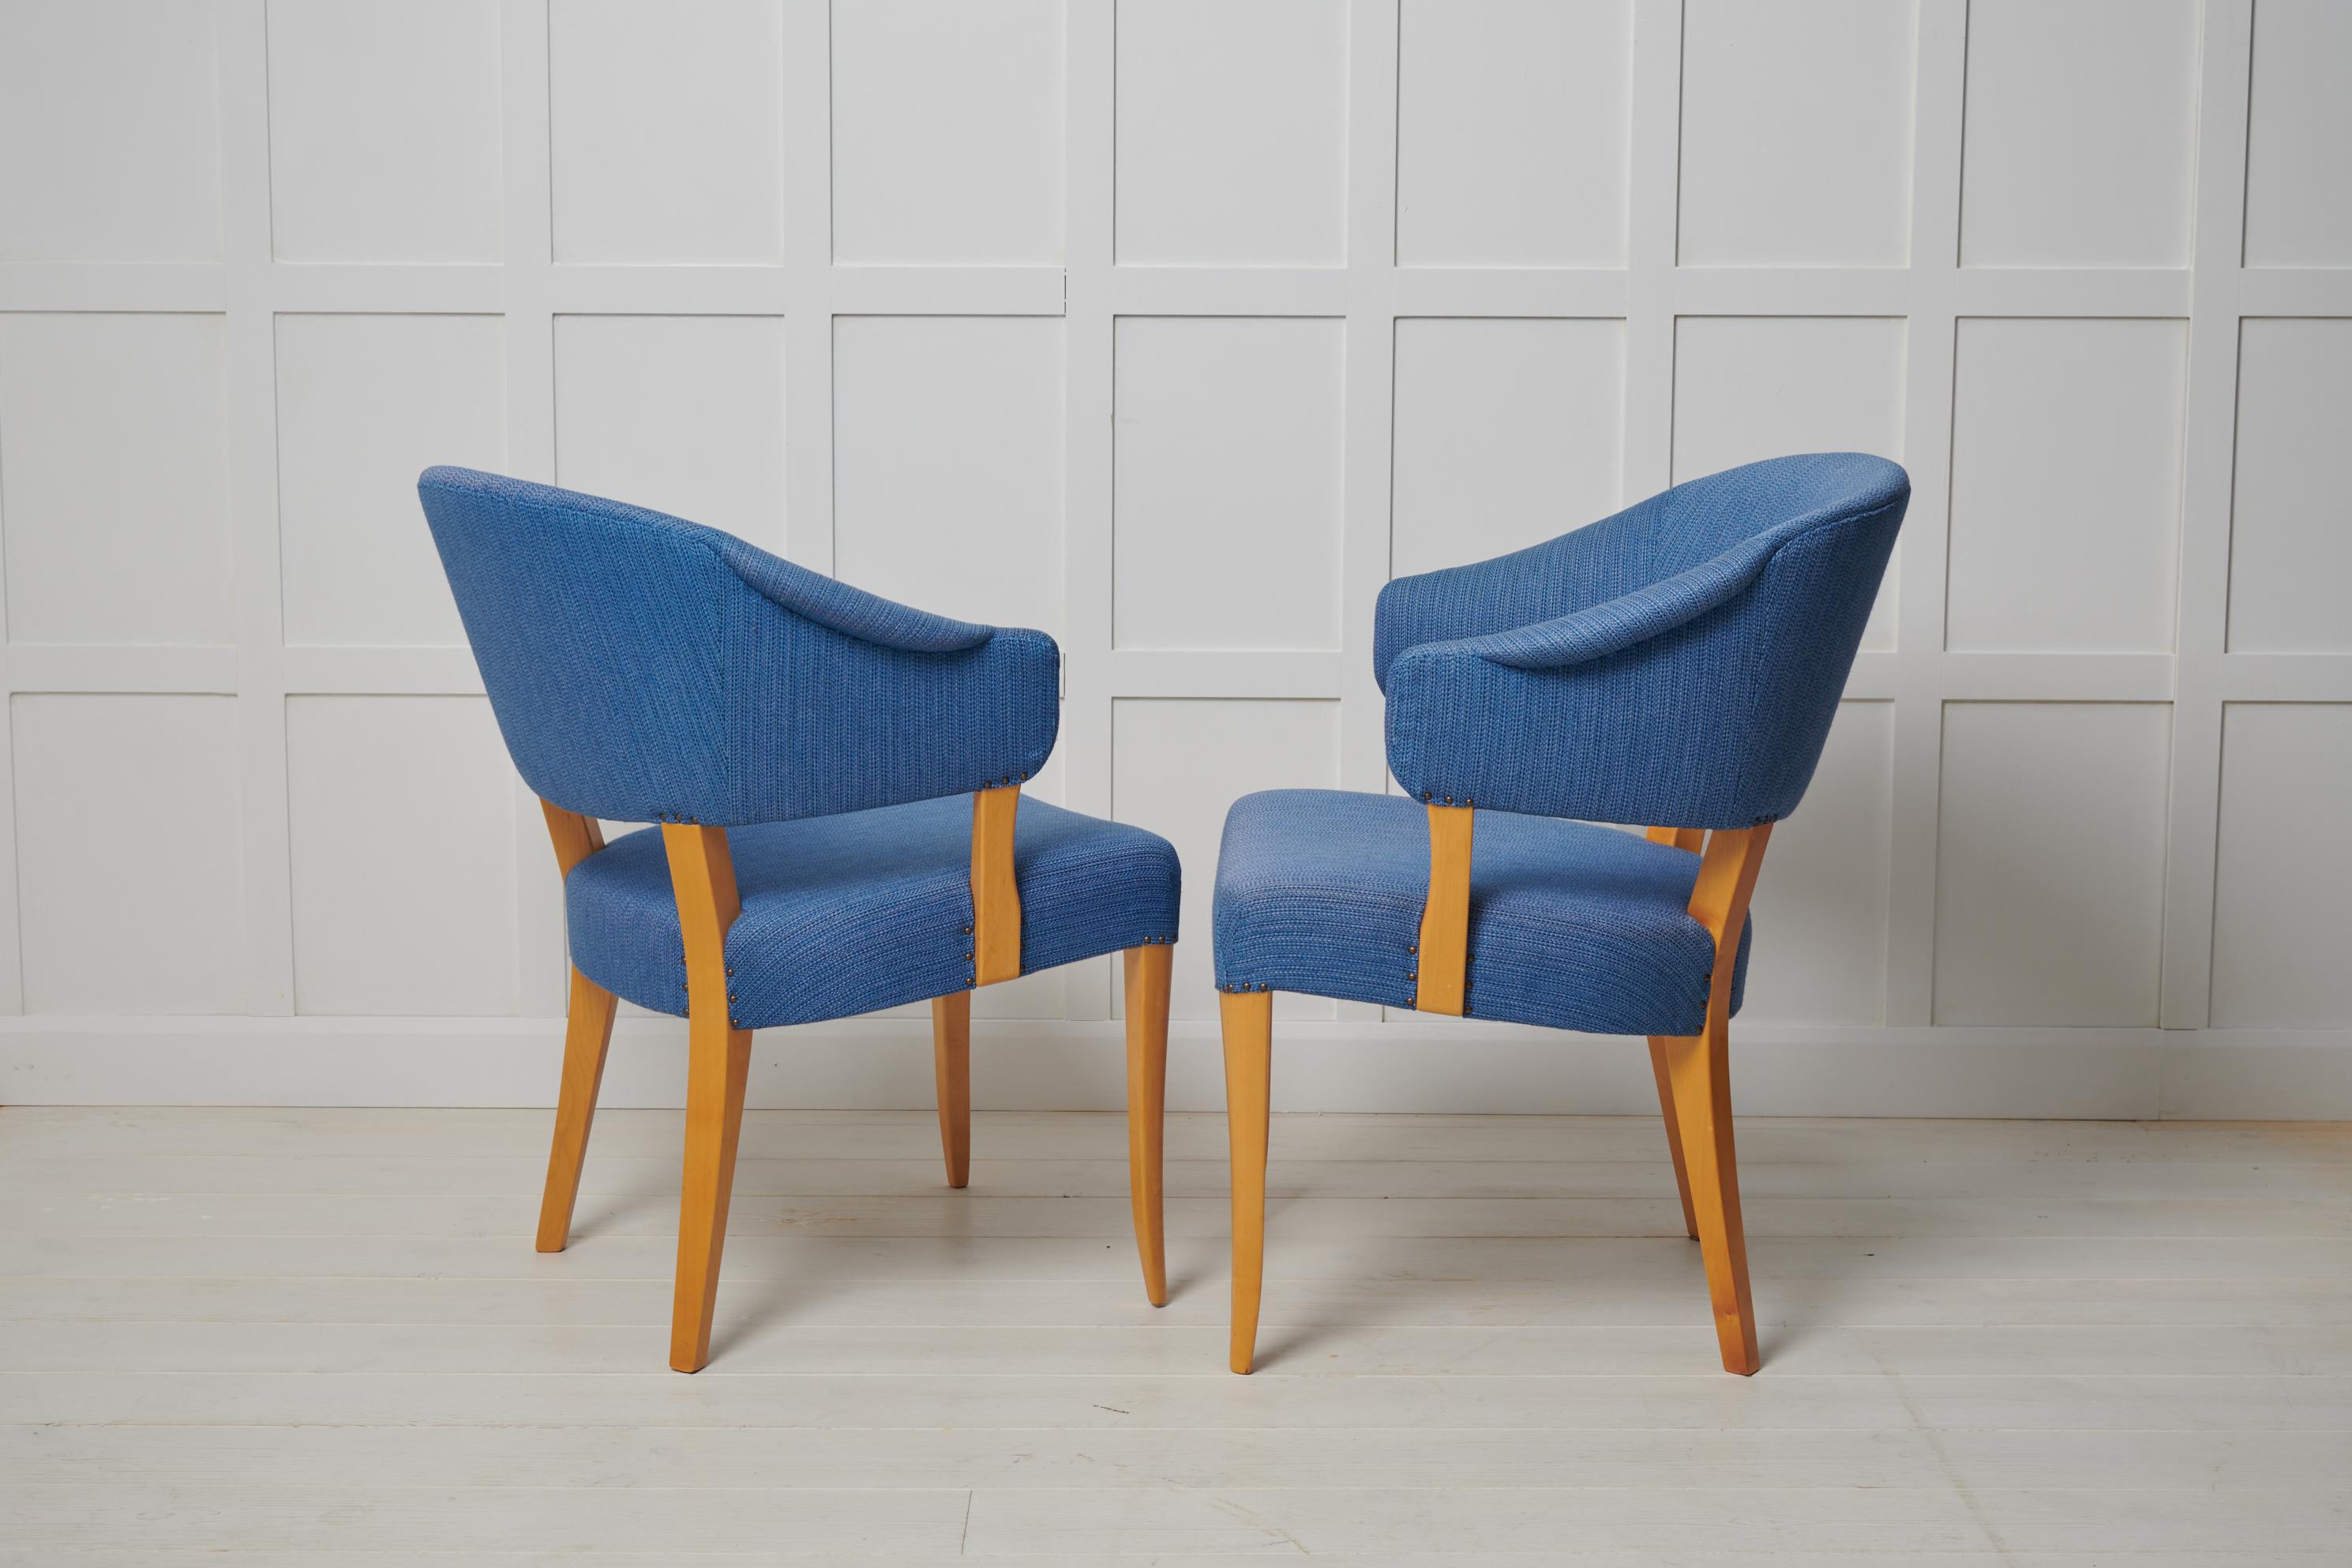 20th Century Scandinavian Modern by Carl Malmsten ”Lata Greven” Pair of Chairs  For Sale